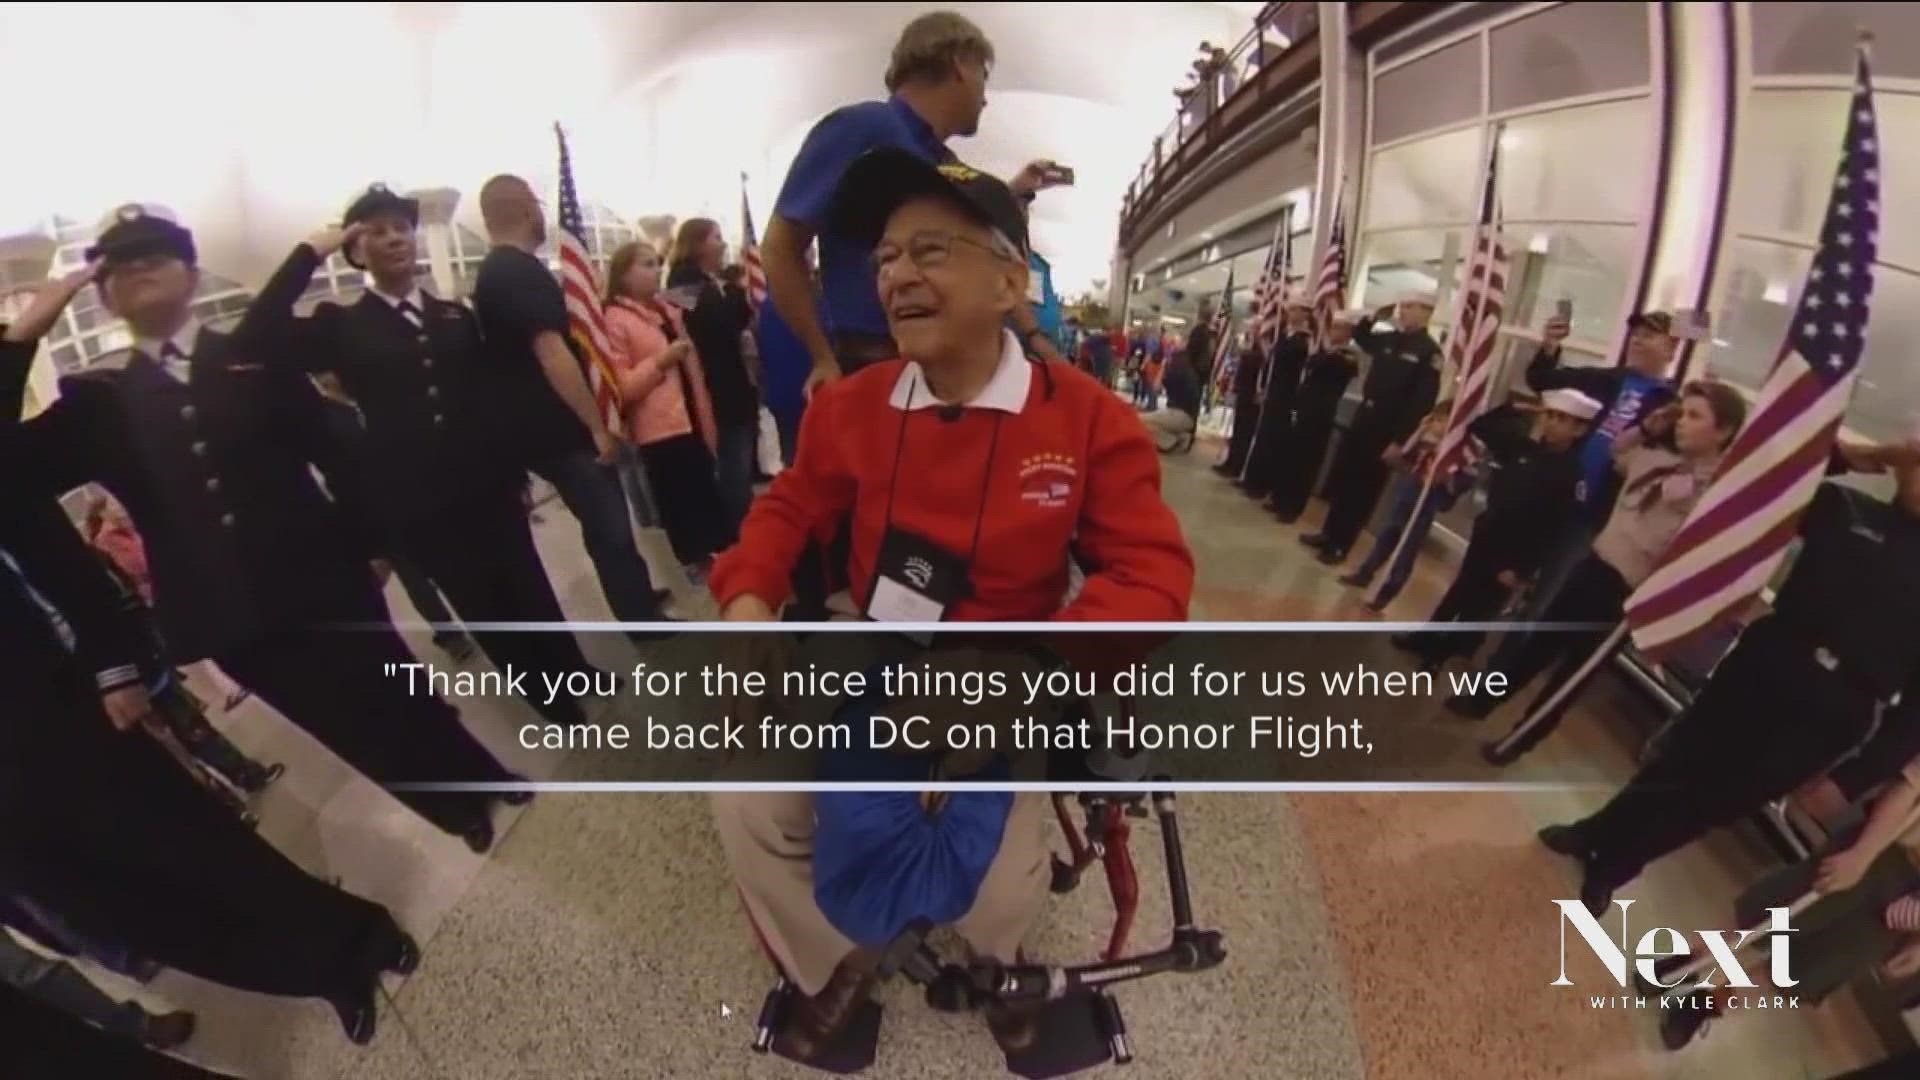 WWII veteran Les Mendelson passed away Thursday at age 98, leaving behind a message of kindness and gratitude.